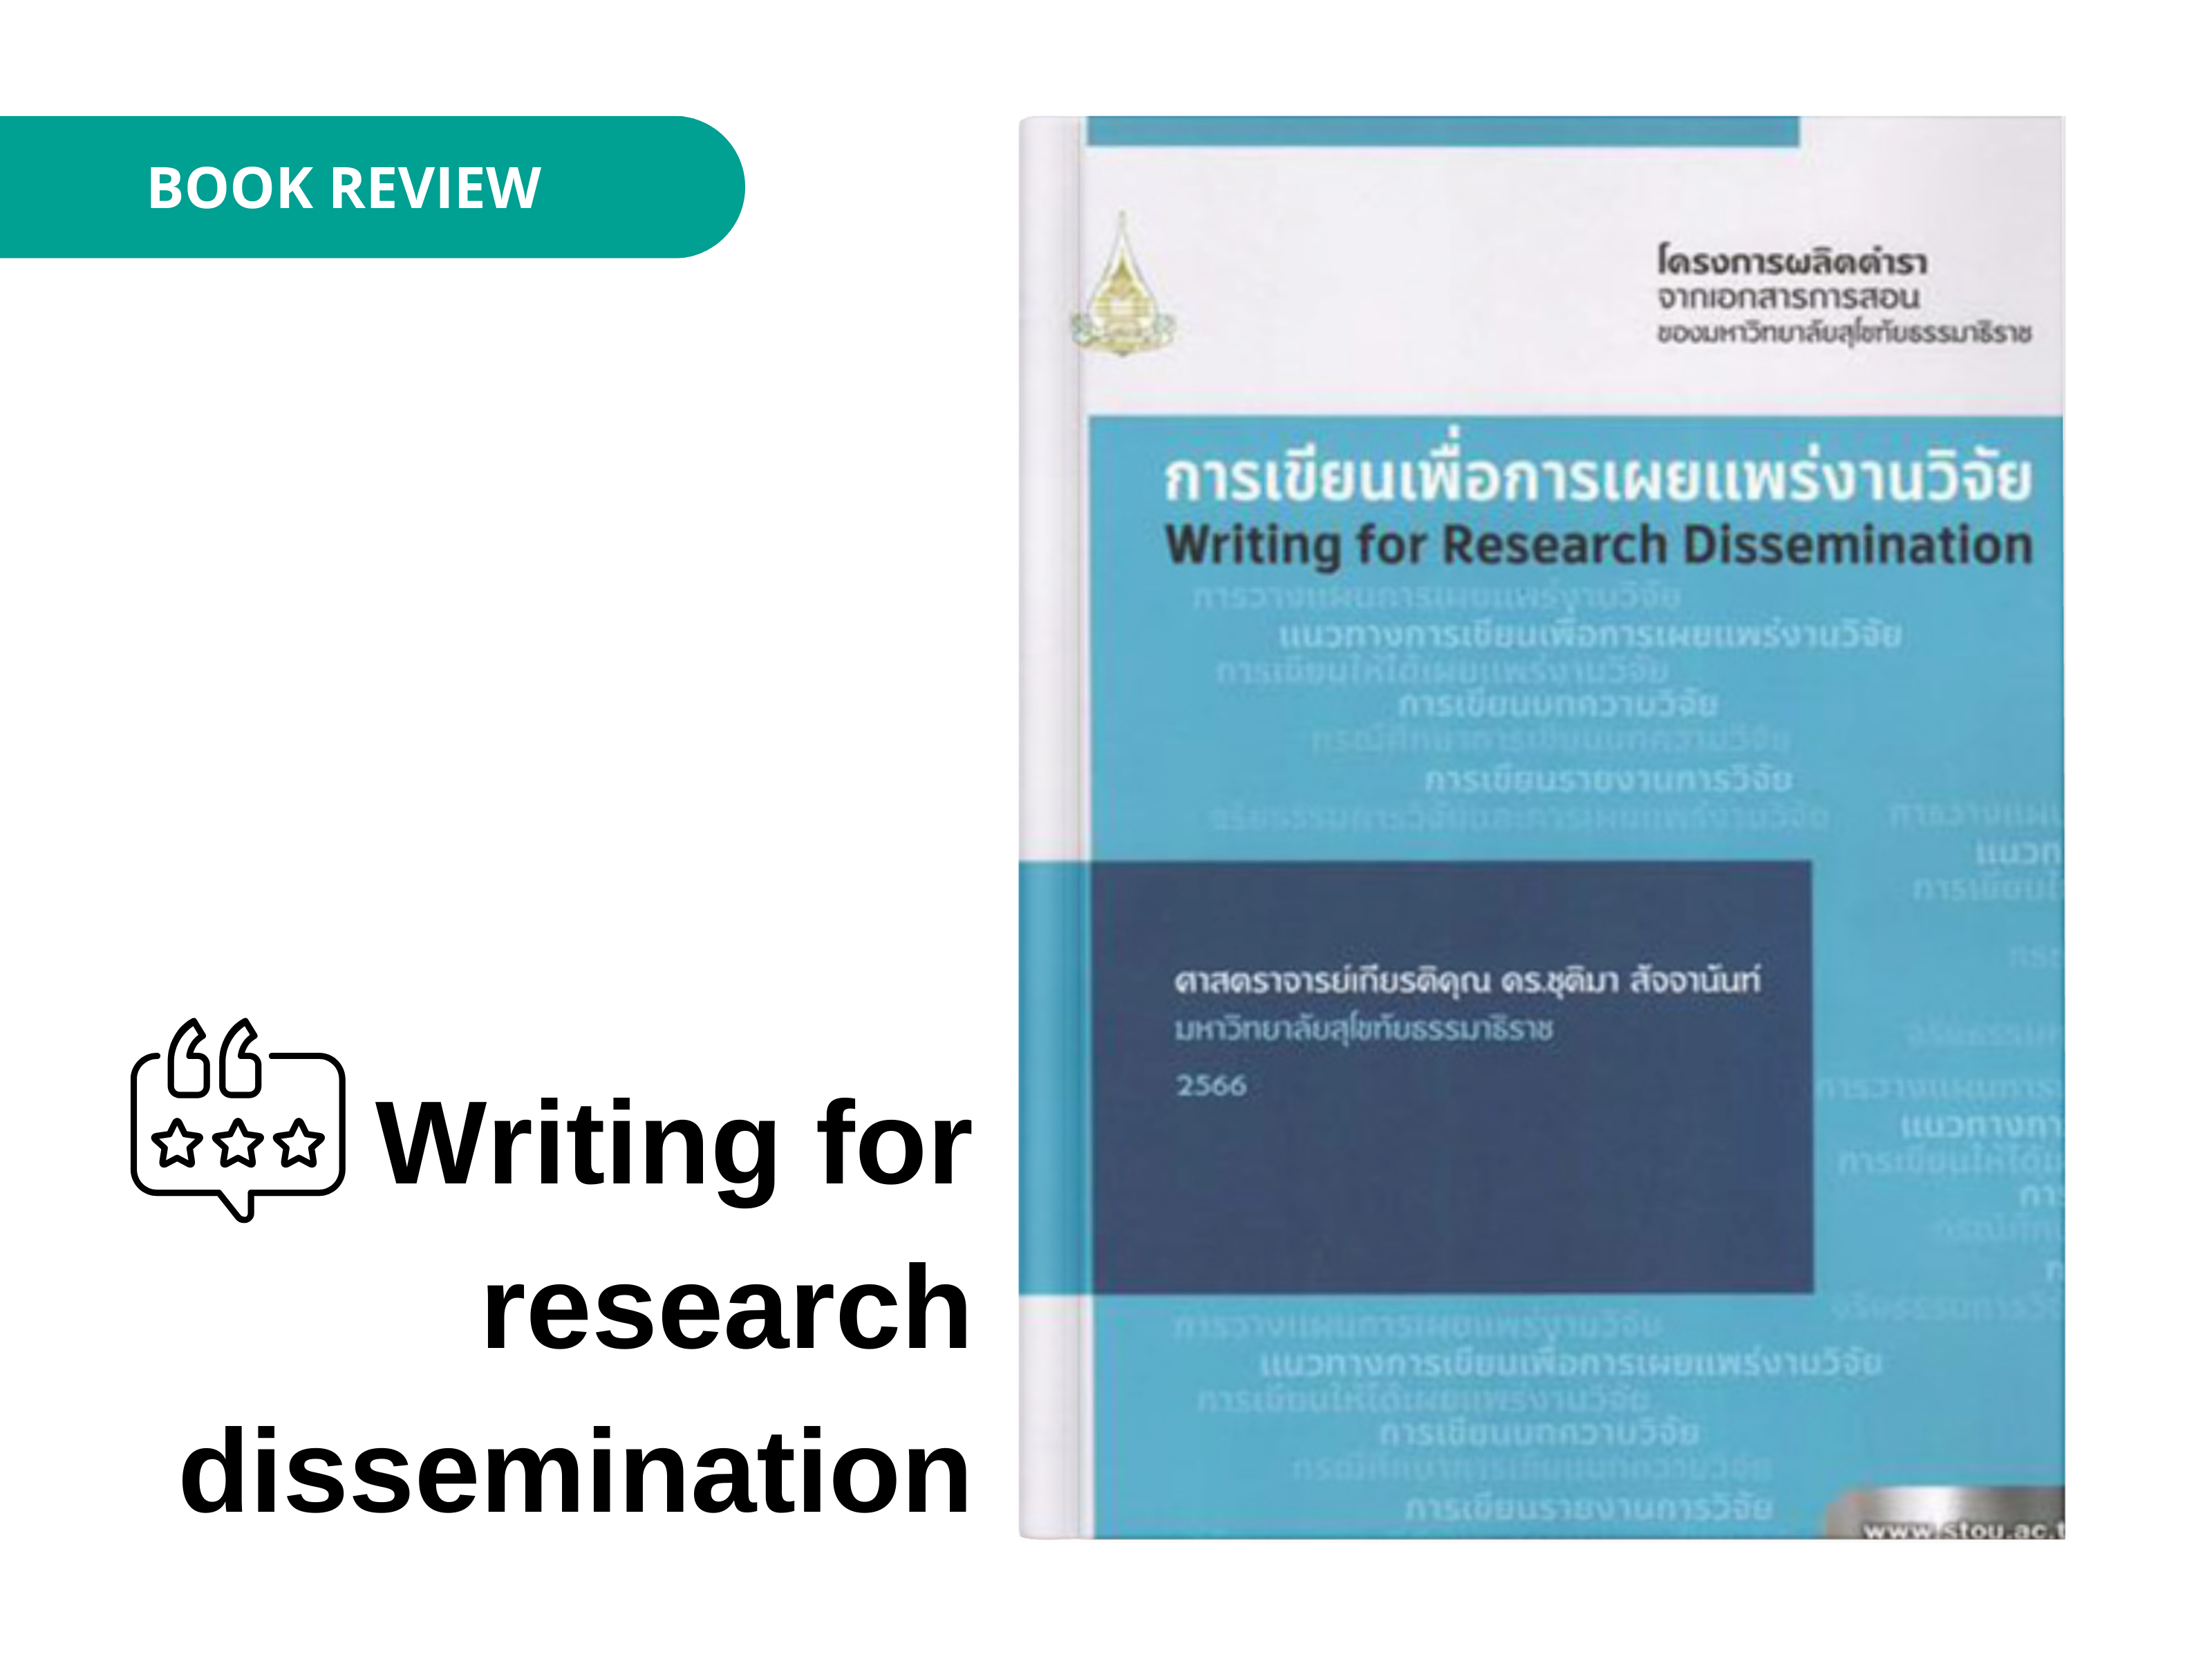 Writing for research dissemination